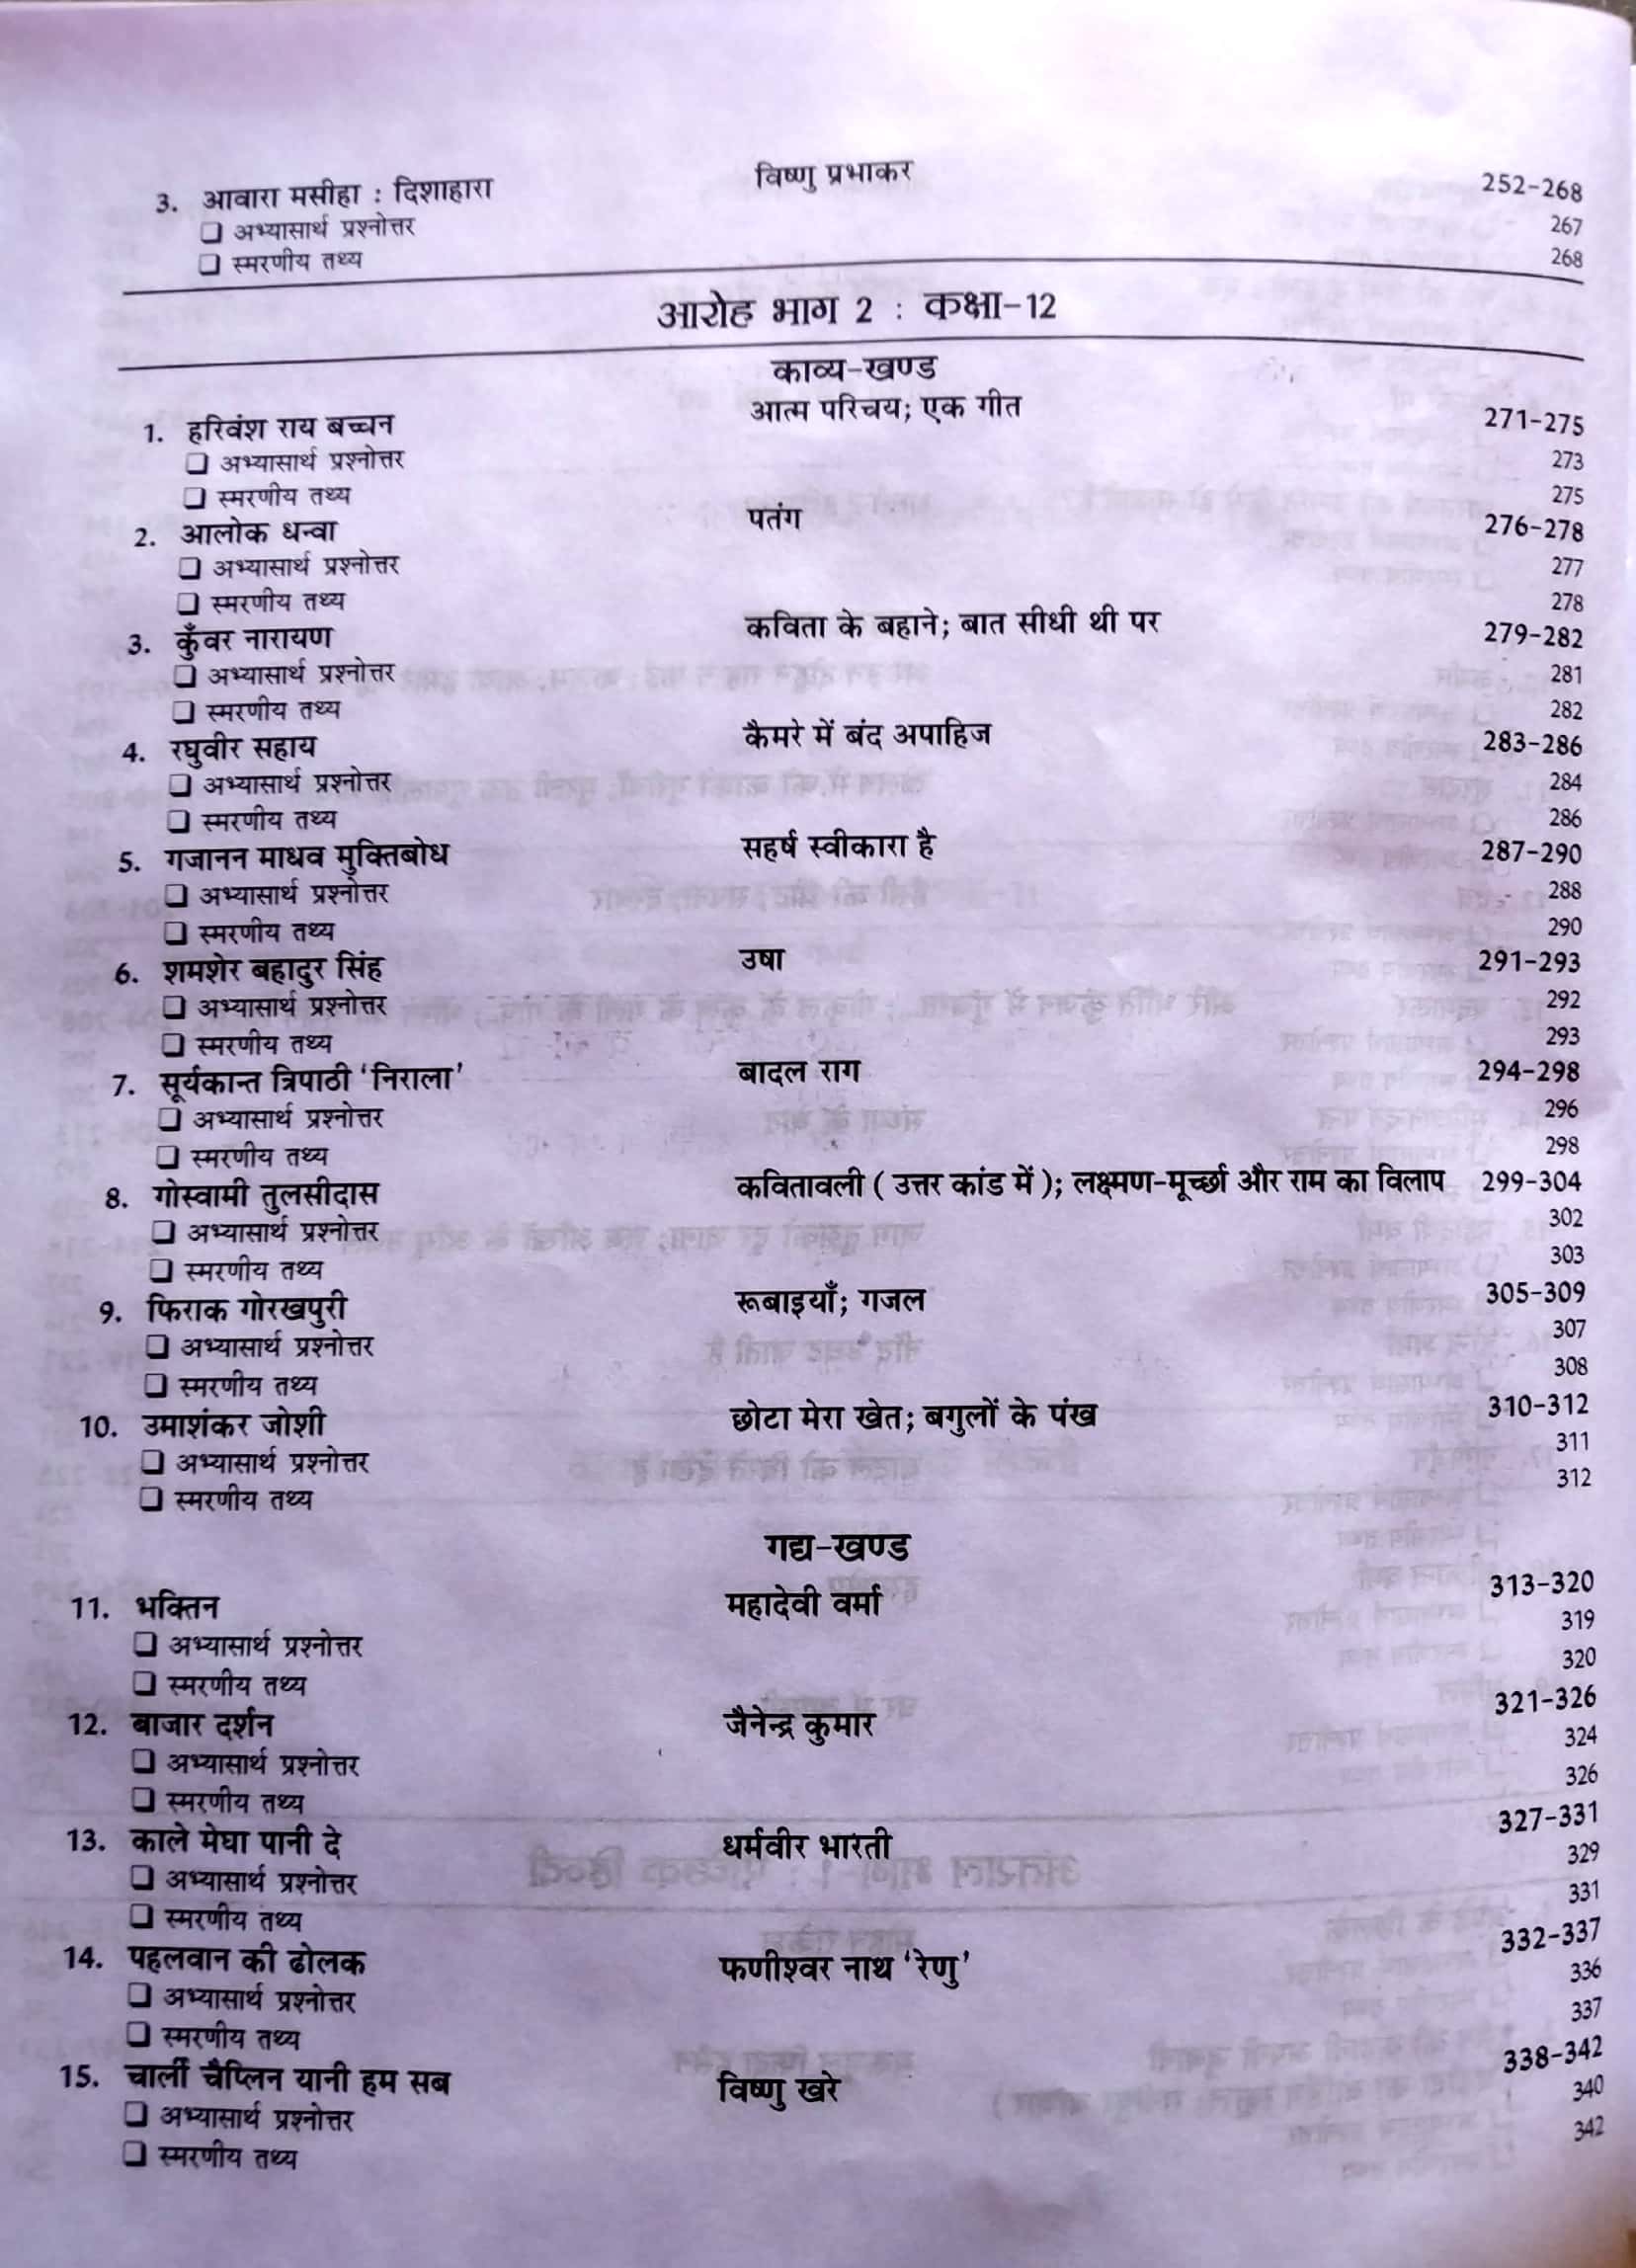 Sugam Hindi Class 11th And 12th By Dr. Vivek Shankar For RPSC 2nd Grade Examination Latest Edition